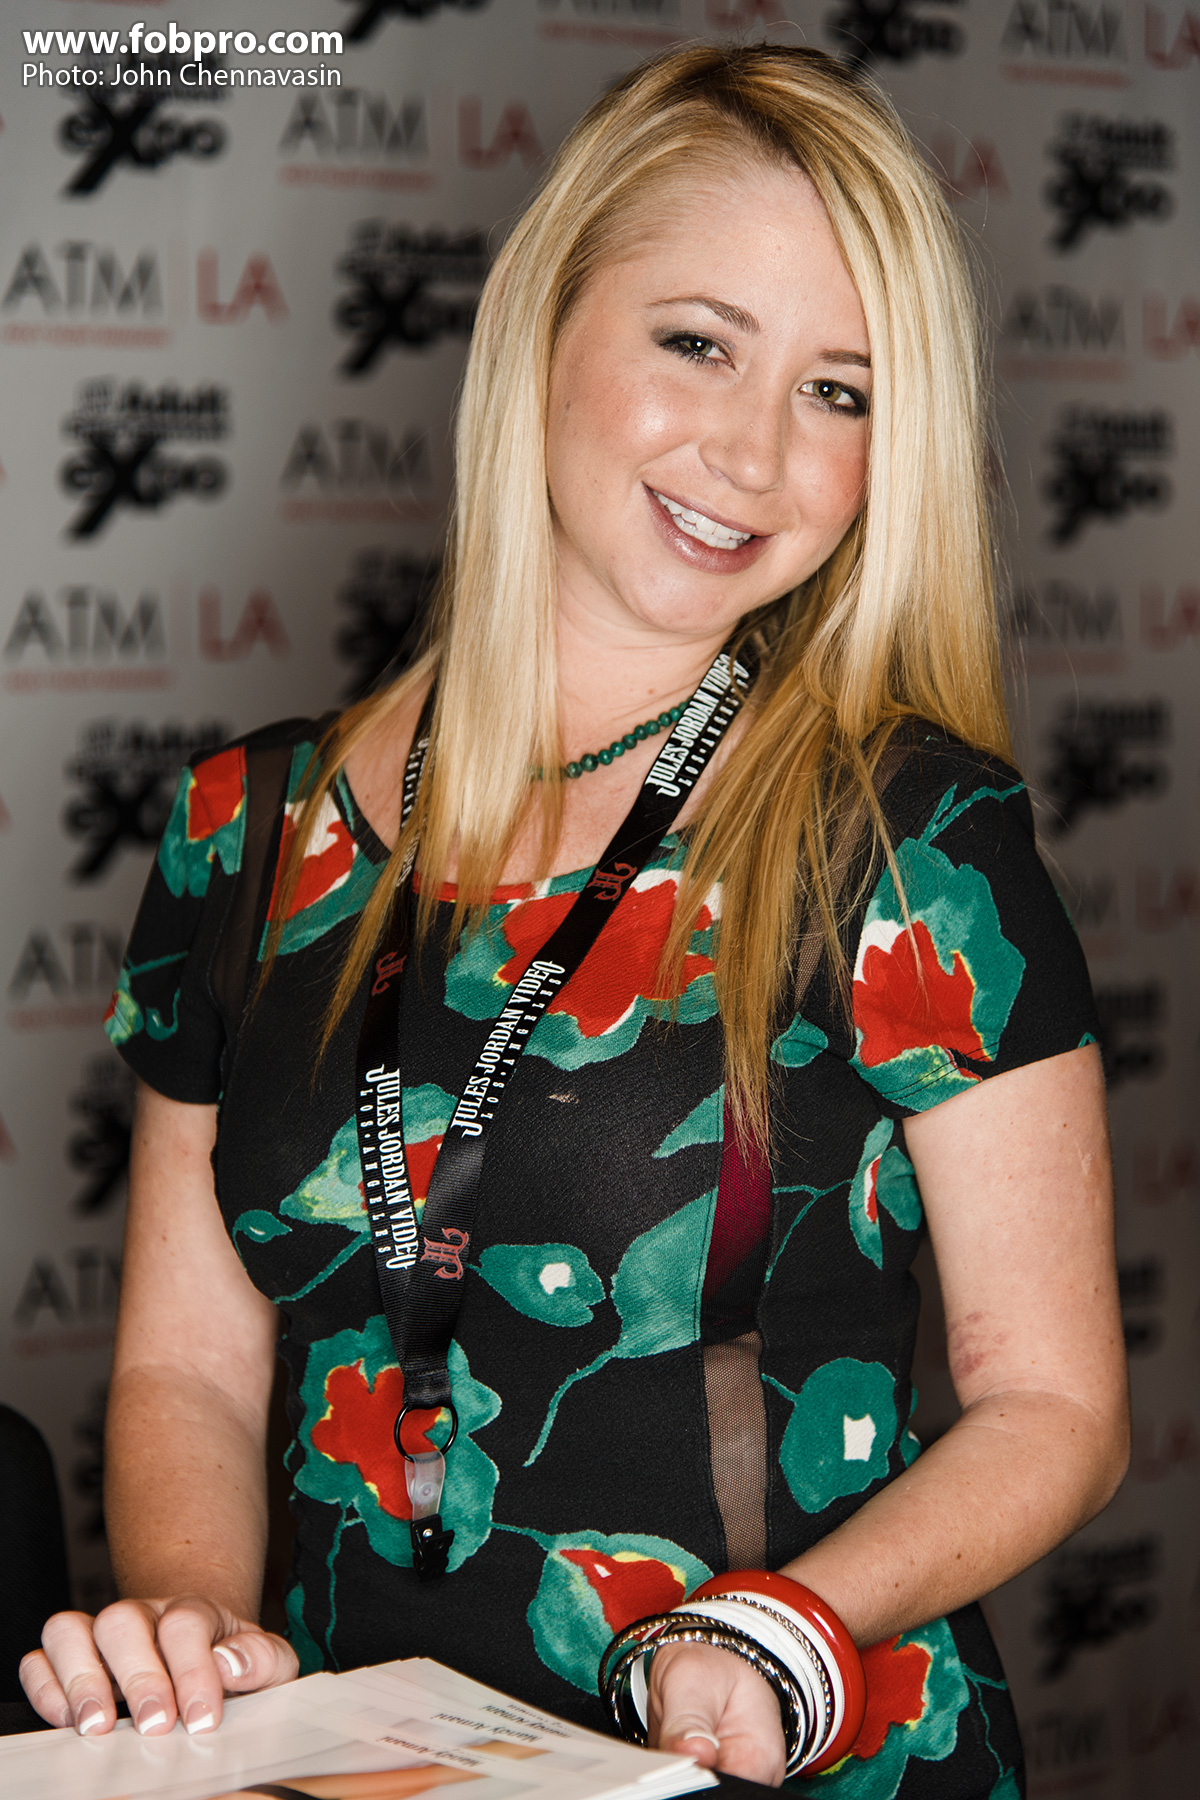 Mandy Armani Avn Adult Entertainment Expo 2015 Day 2 Fob Productions